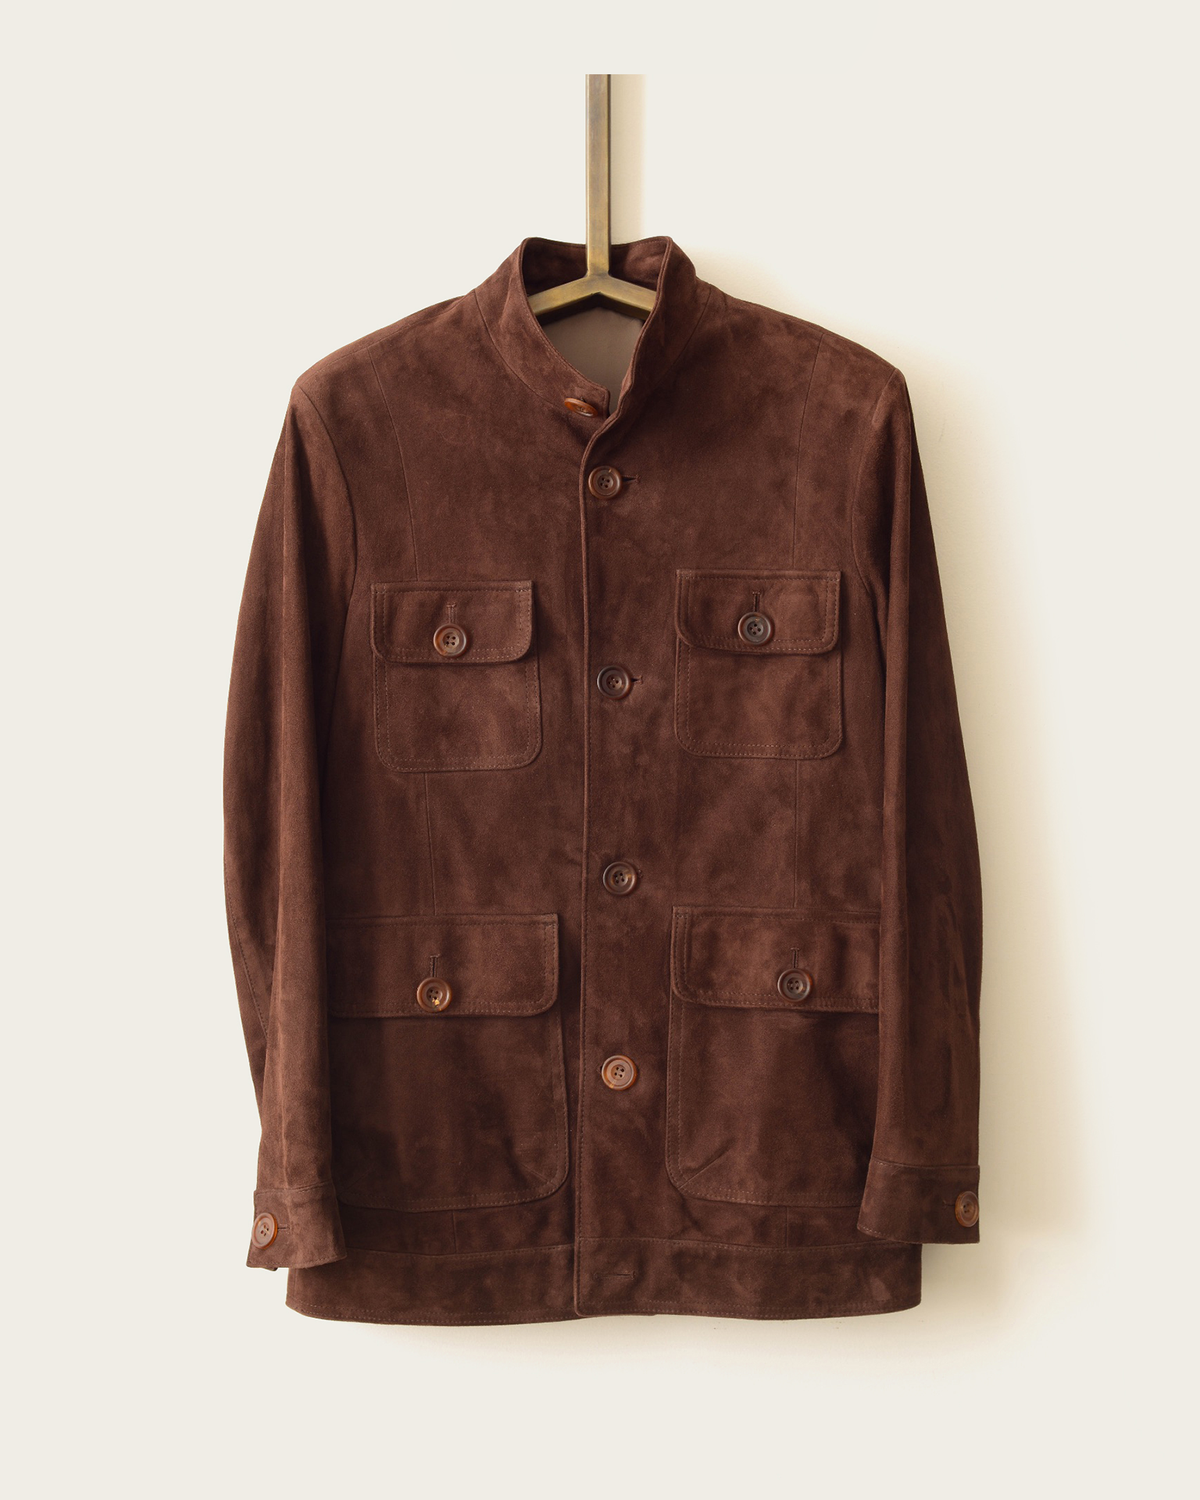 Image of the Trapp Utility Jacket from Savas